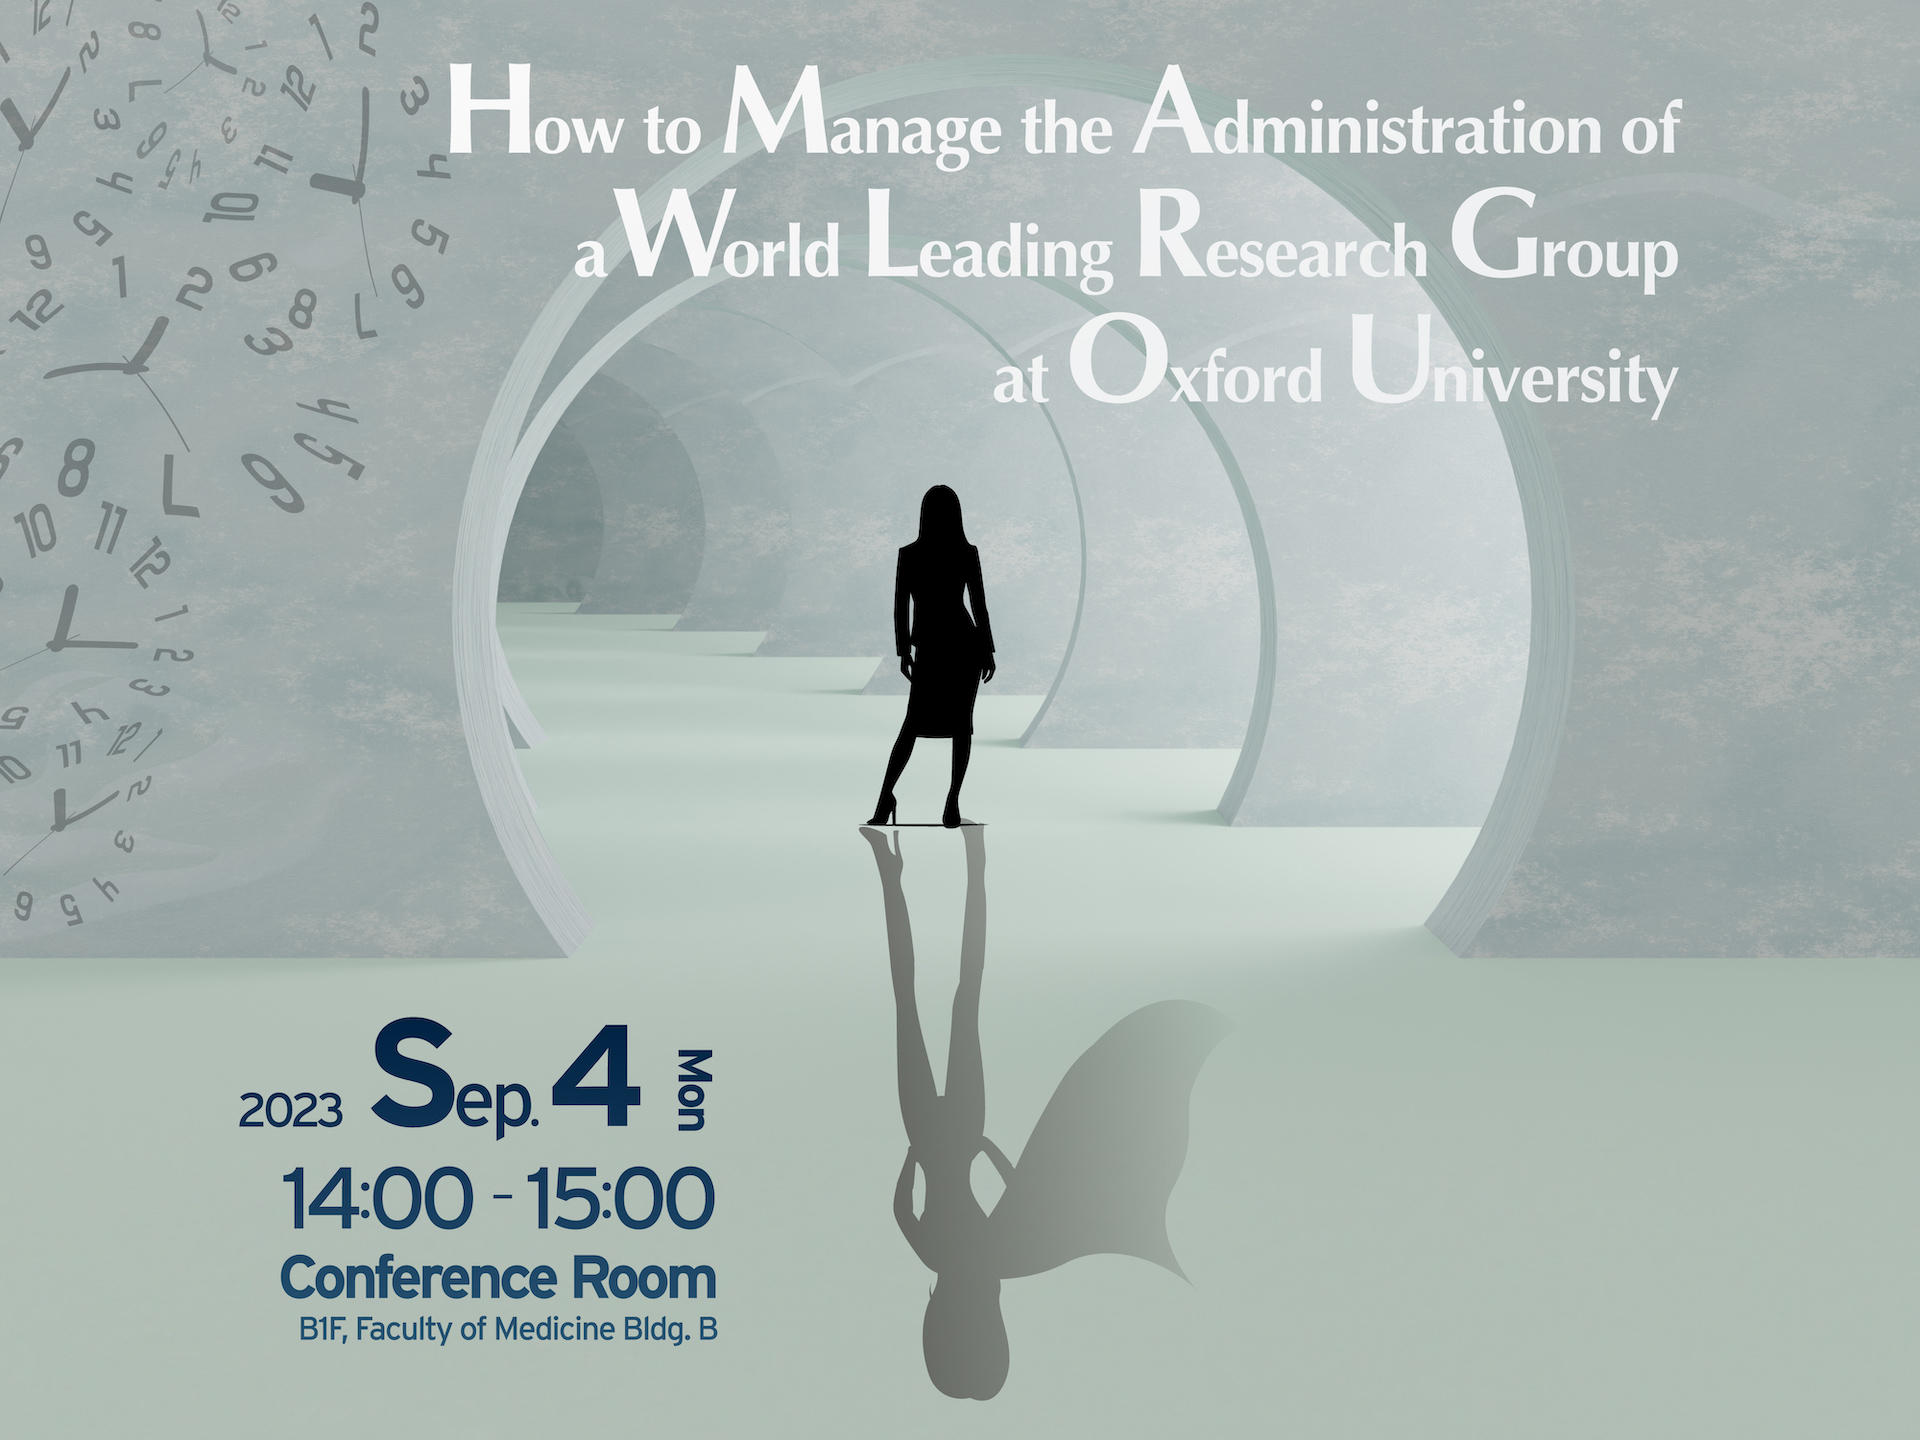 How to Manage the Administration of a World Leading Research Group at Oxford University